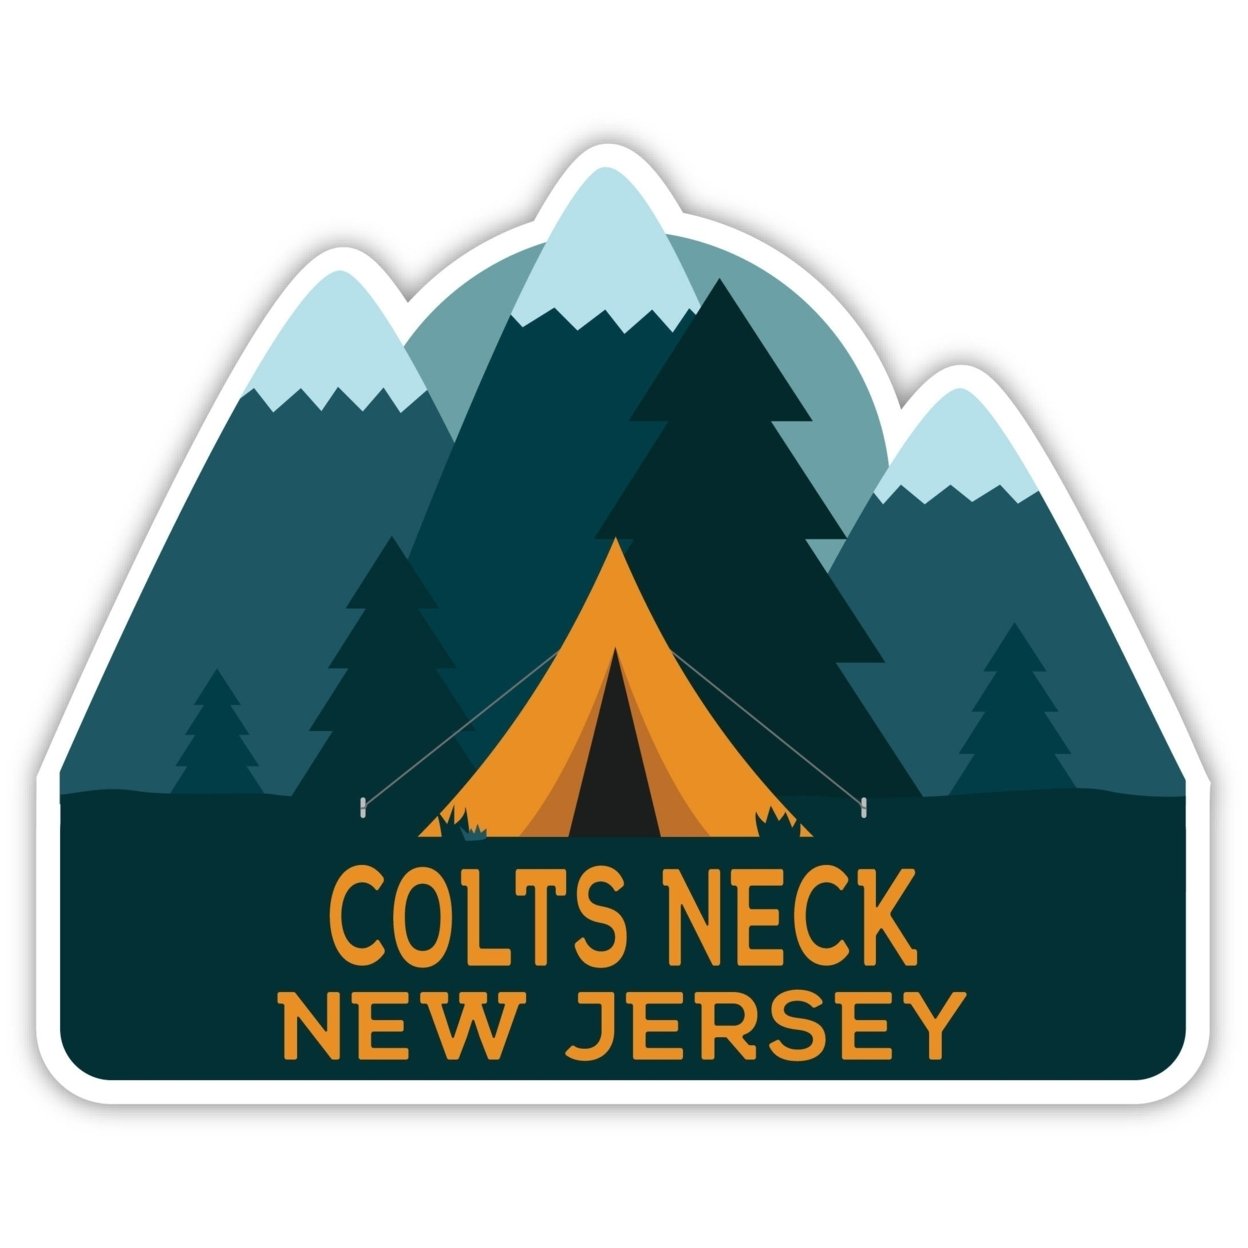 Colts Neck New Jersey Souvenir Decorative Stickers (Choose Theme And Size) - 4-Pack, 12-Inch, Tent